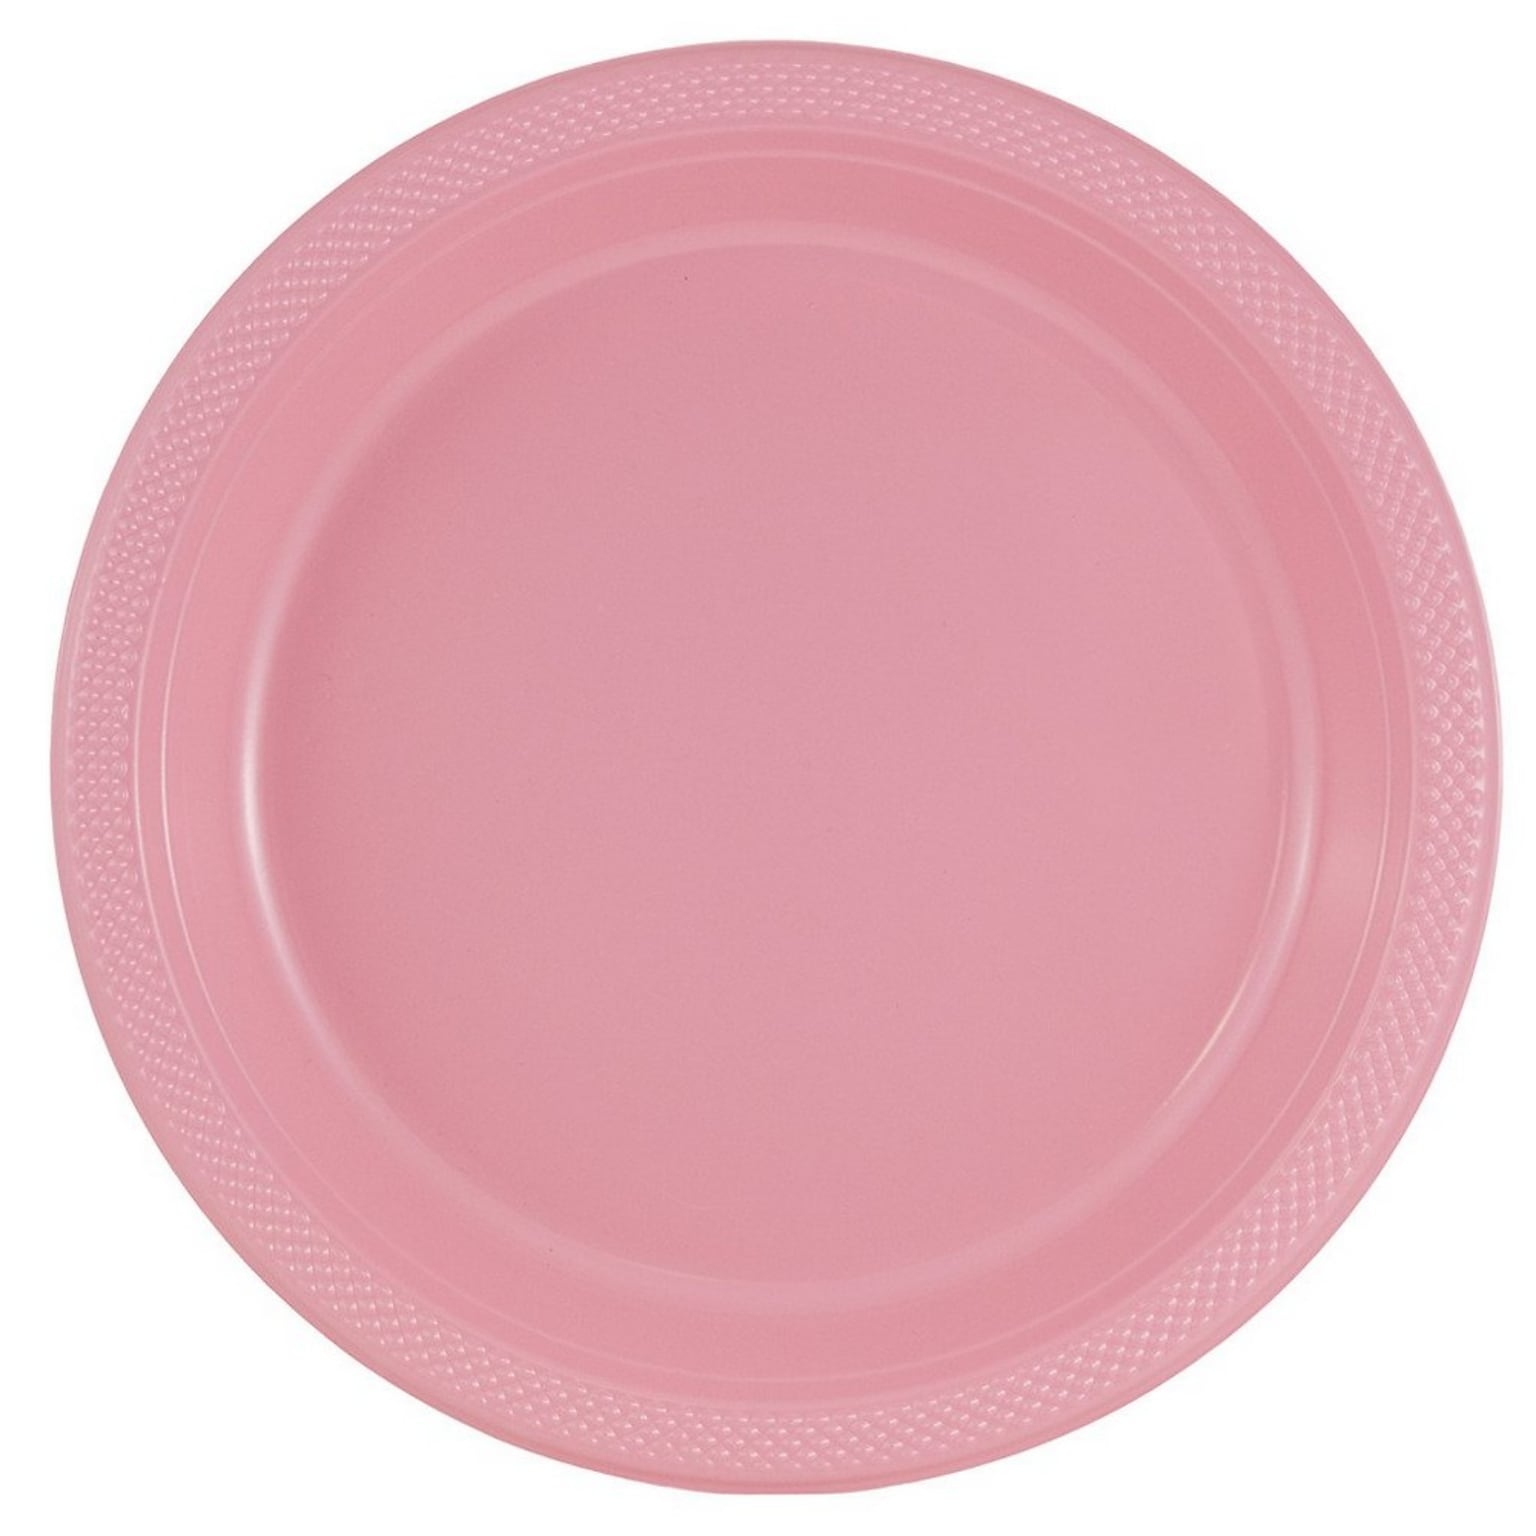 JAM PAPER Round Plastic Party Plates, Large, 10 1/4 inch, Light Pink, 20/Pack